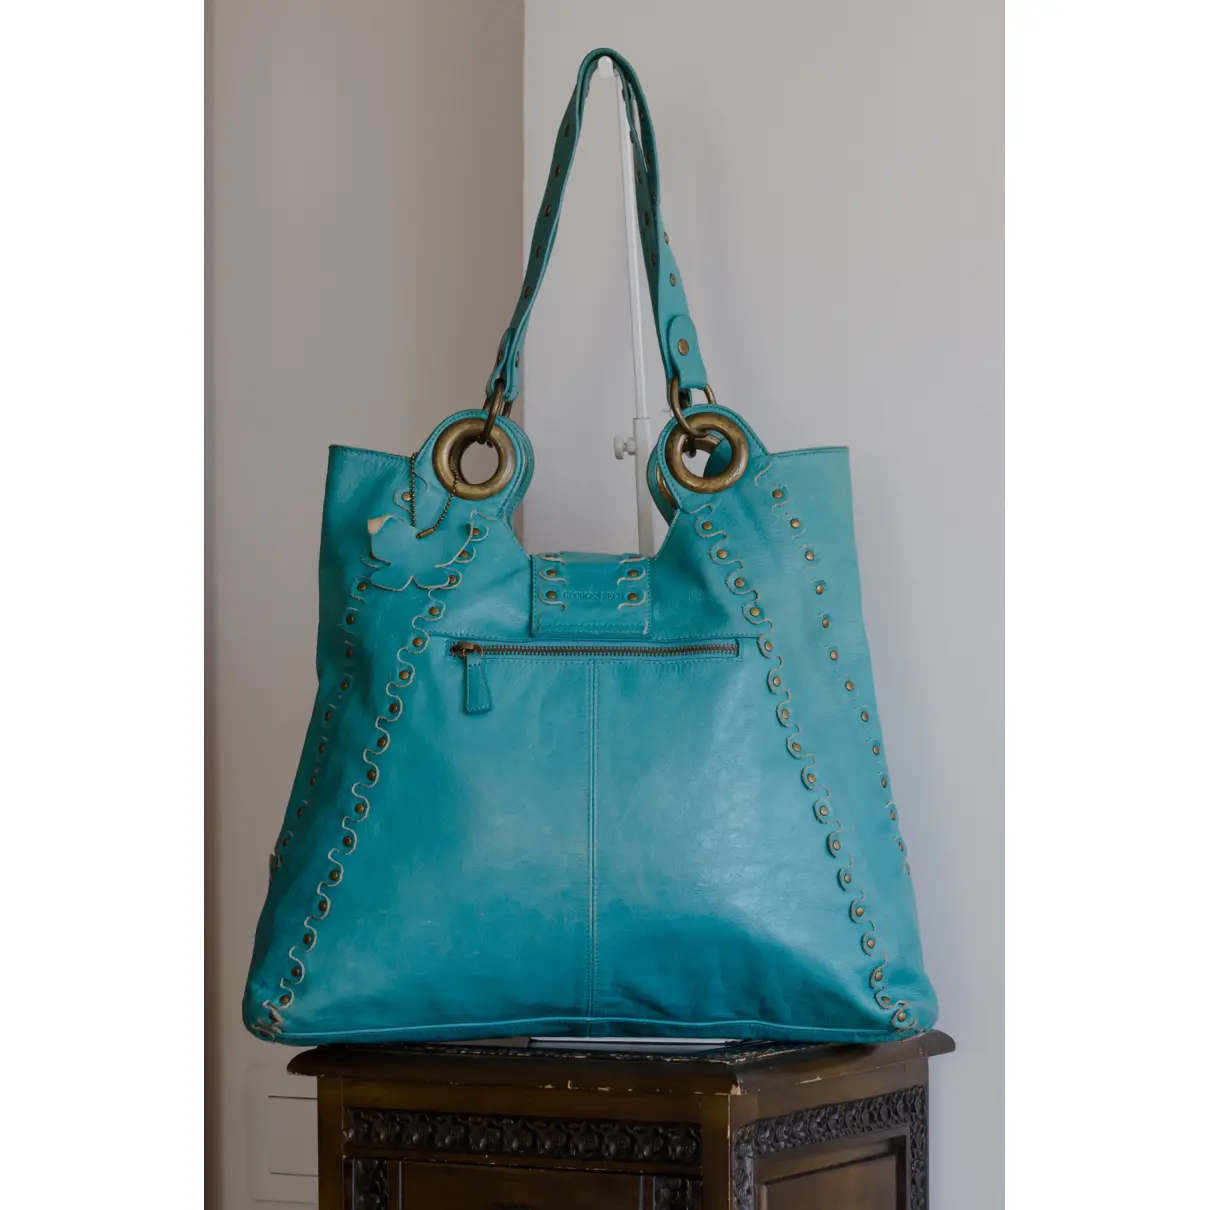 Buy Georges Rech Leather tote online